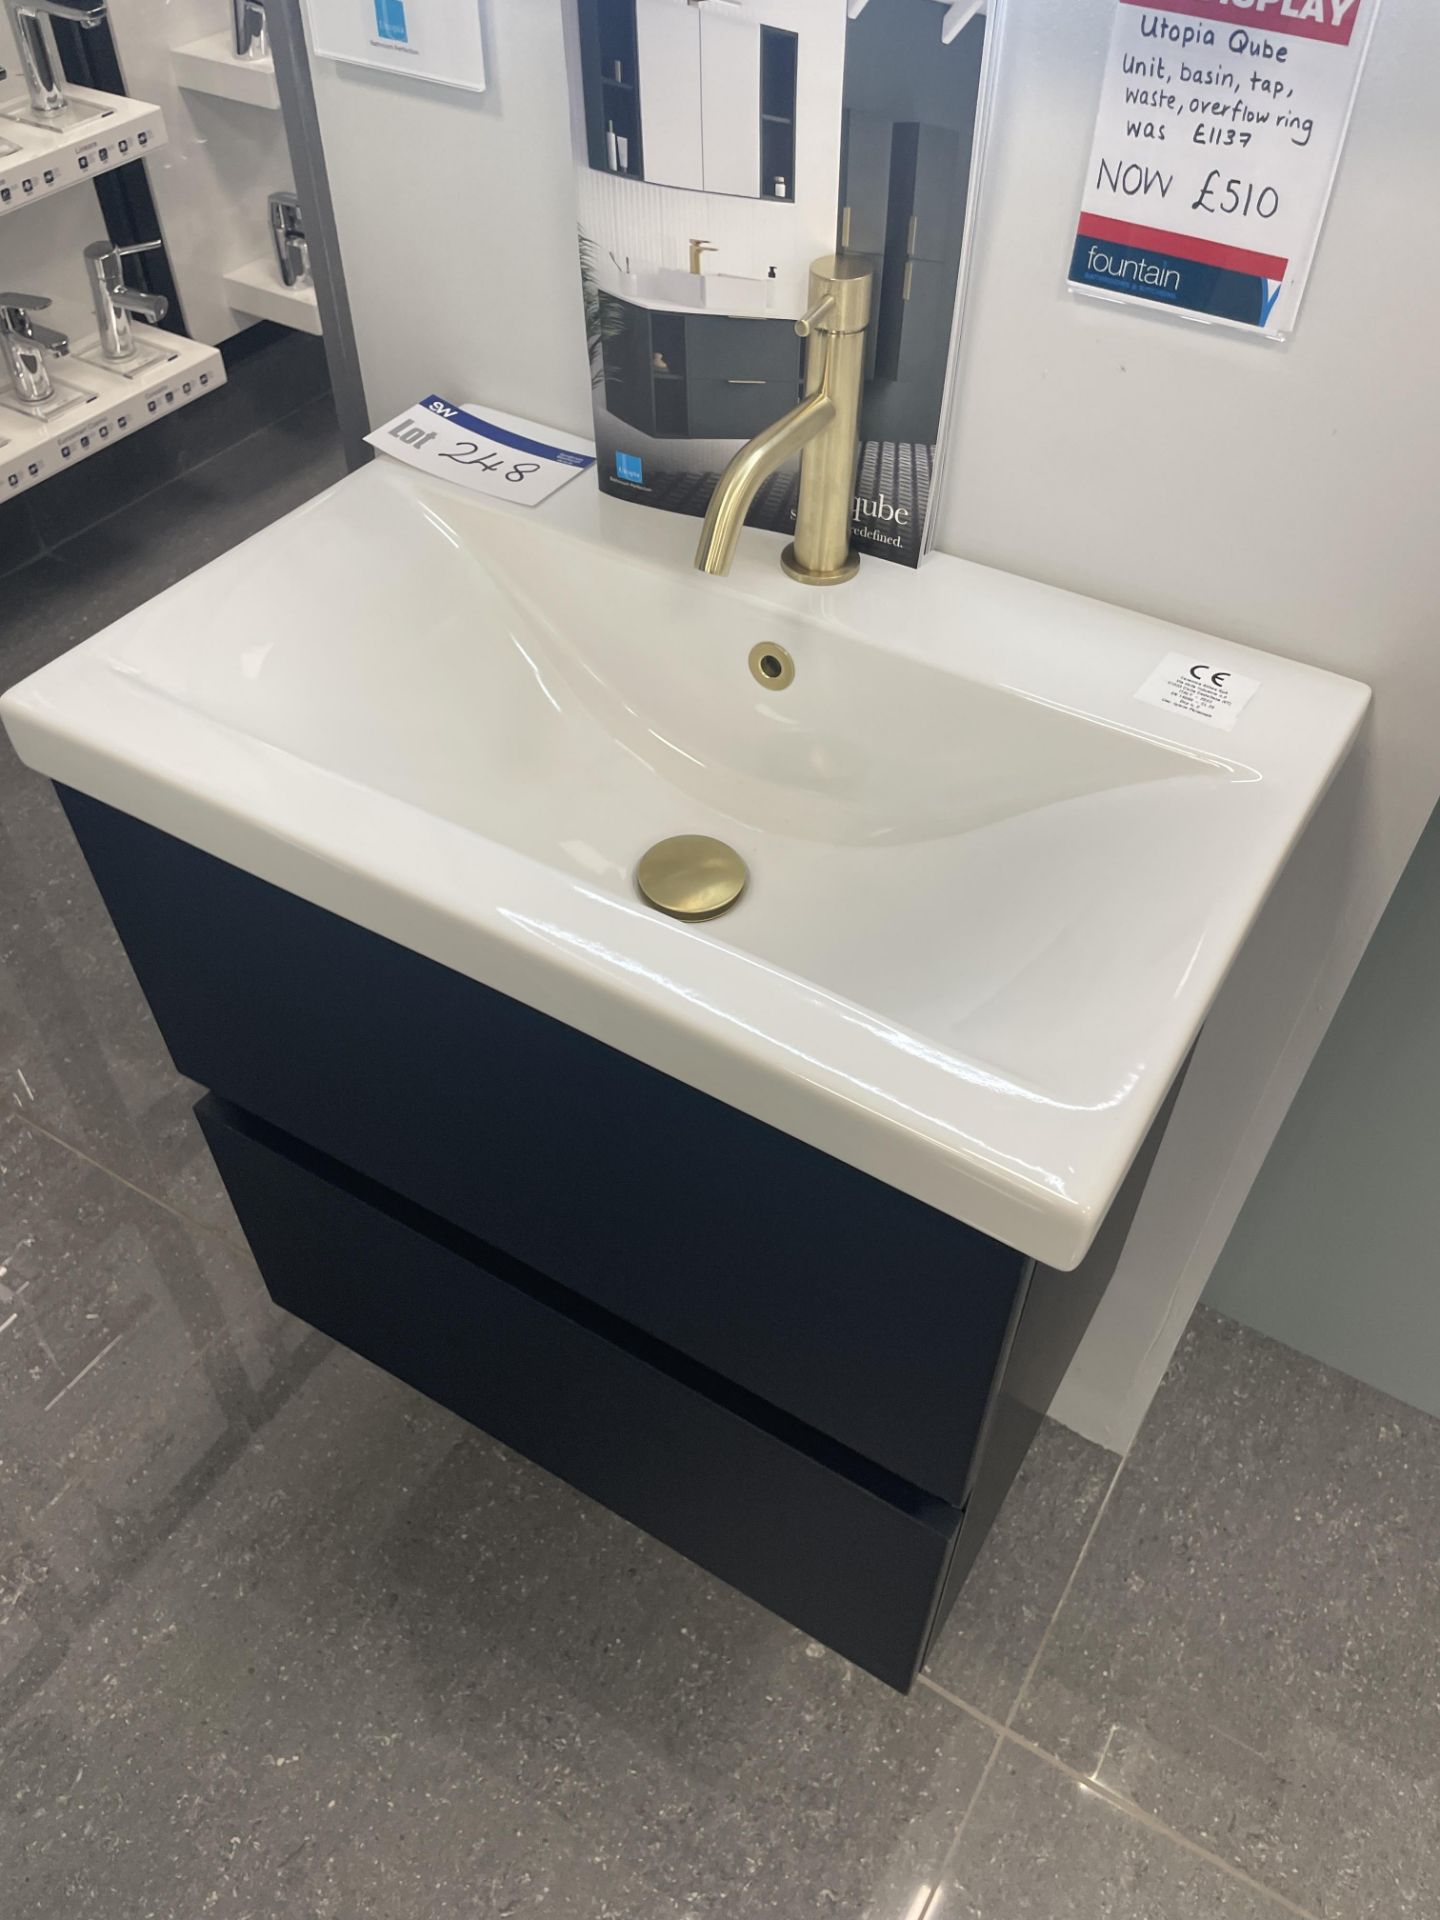 Utopia Qube Basin Unit, with tap and HIB Ether mirrored cabinet, basin approx. 600mm x 400mm, - Image 2 of 4